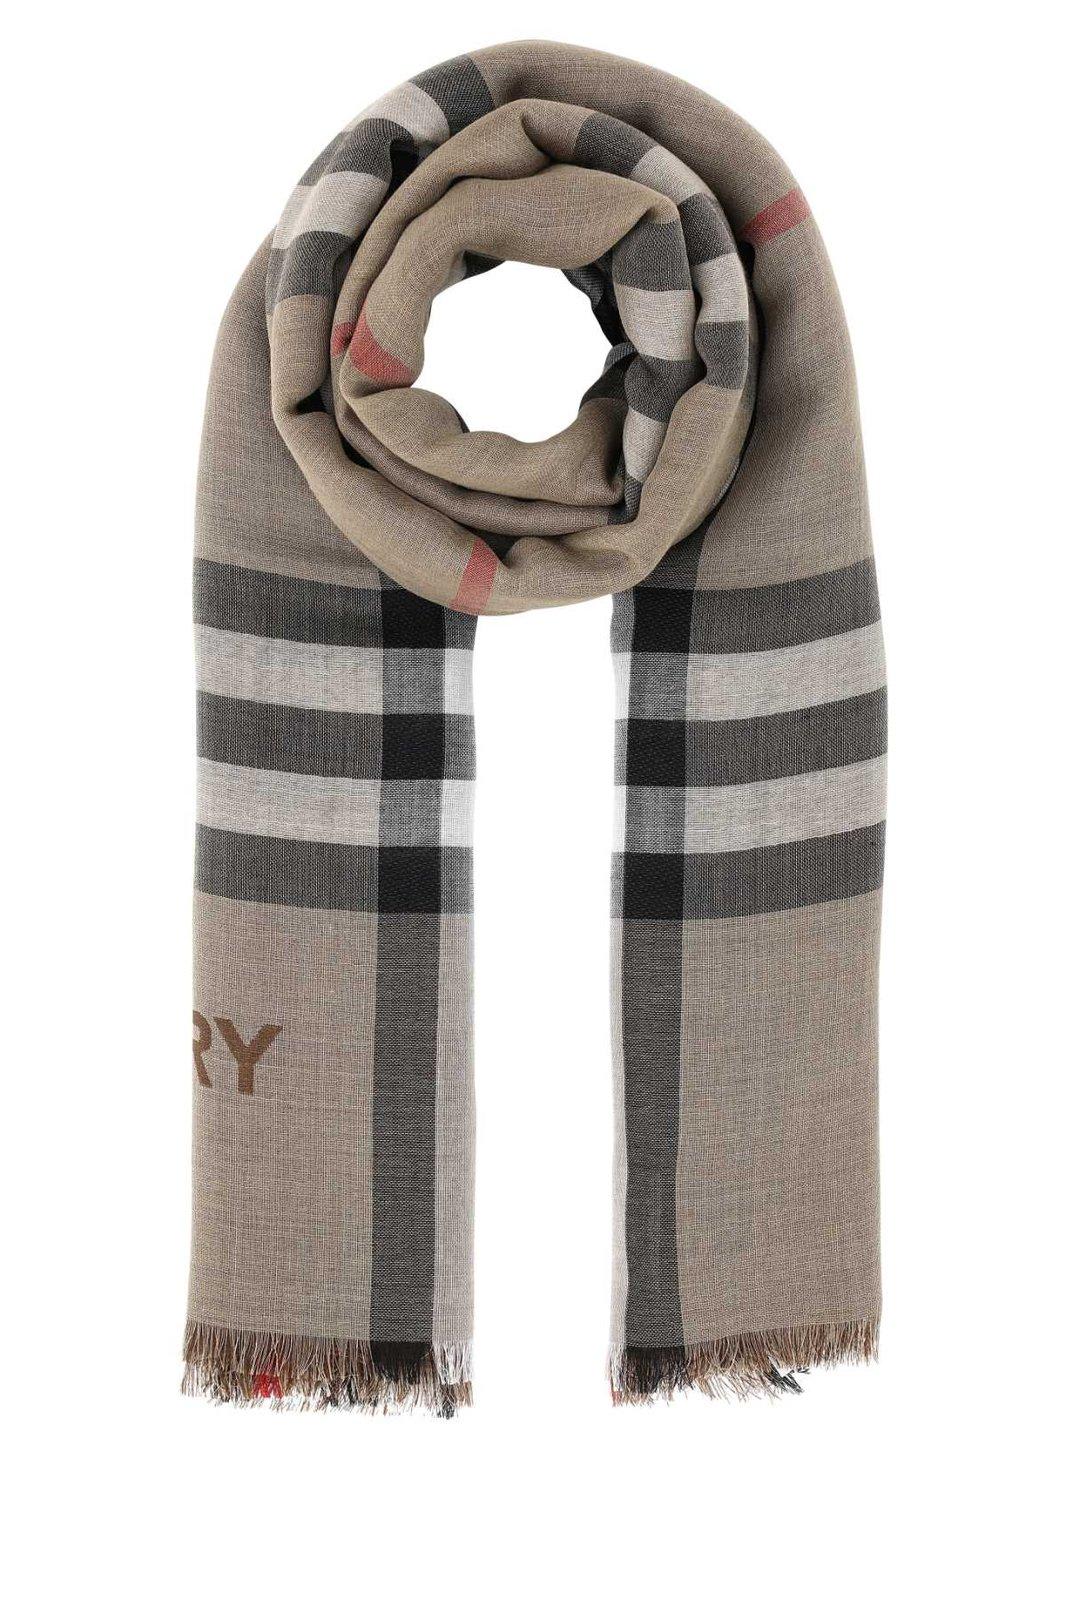 Burberry Frayed Edge Checked Scarf In Archive Beige